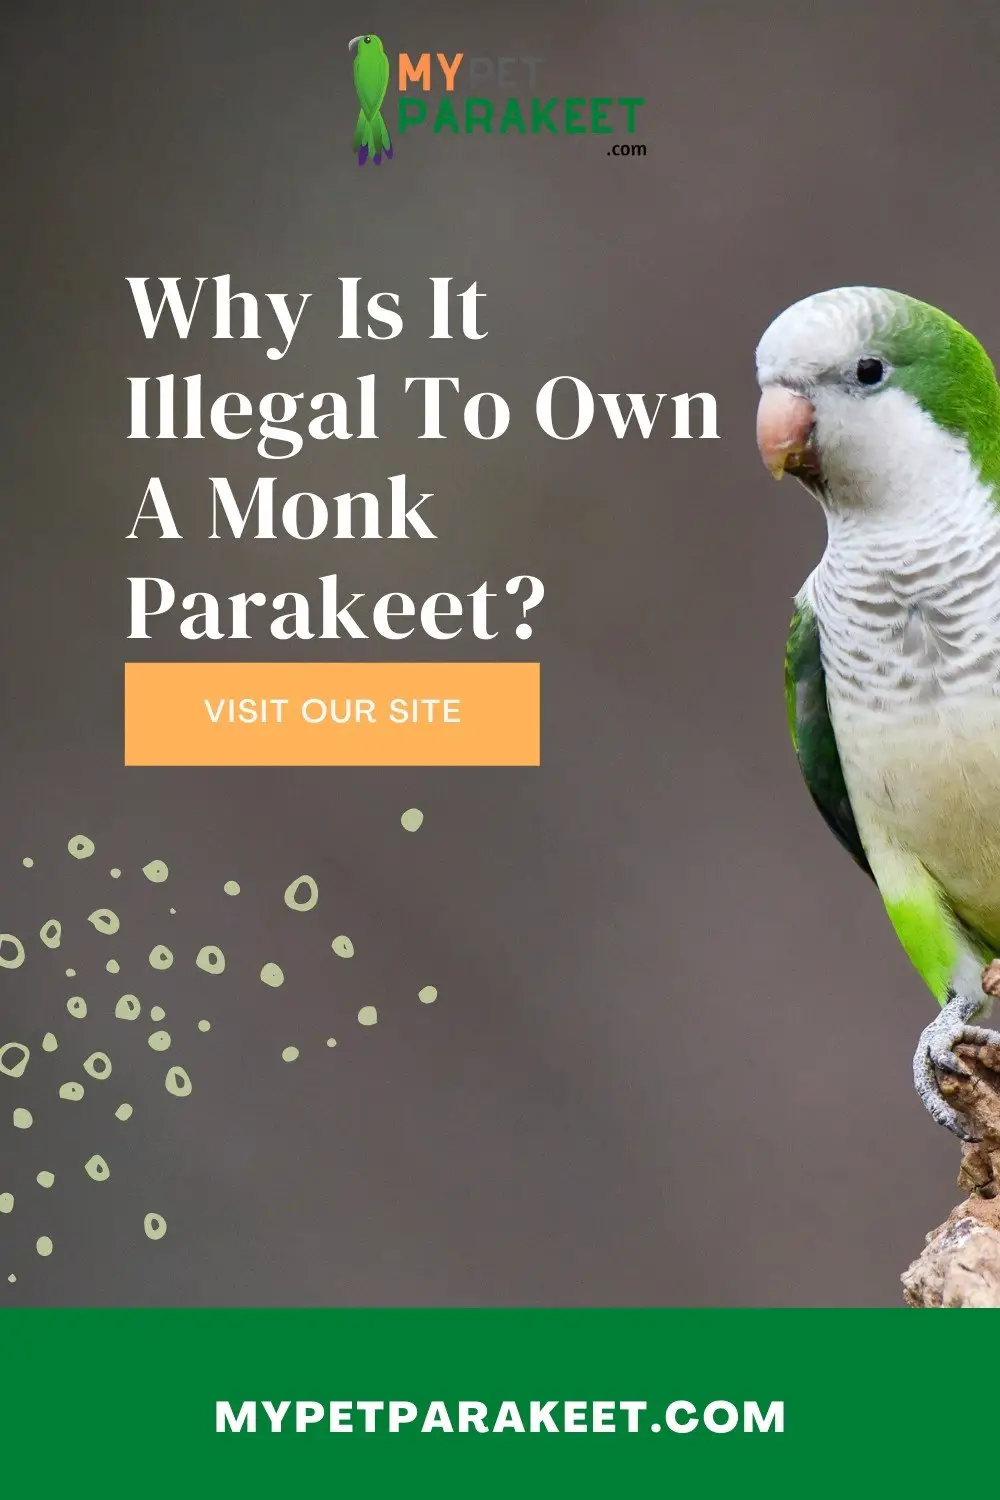 Why It Is Illegal To Own A Monk Parakeet (Quaker Parrot) In These